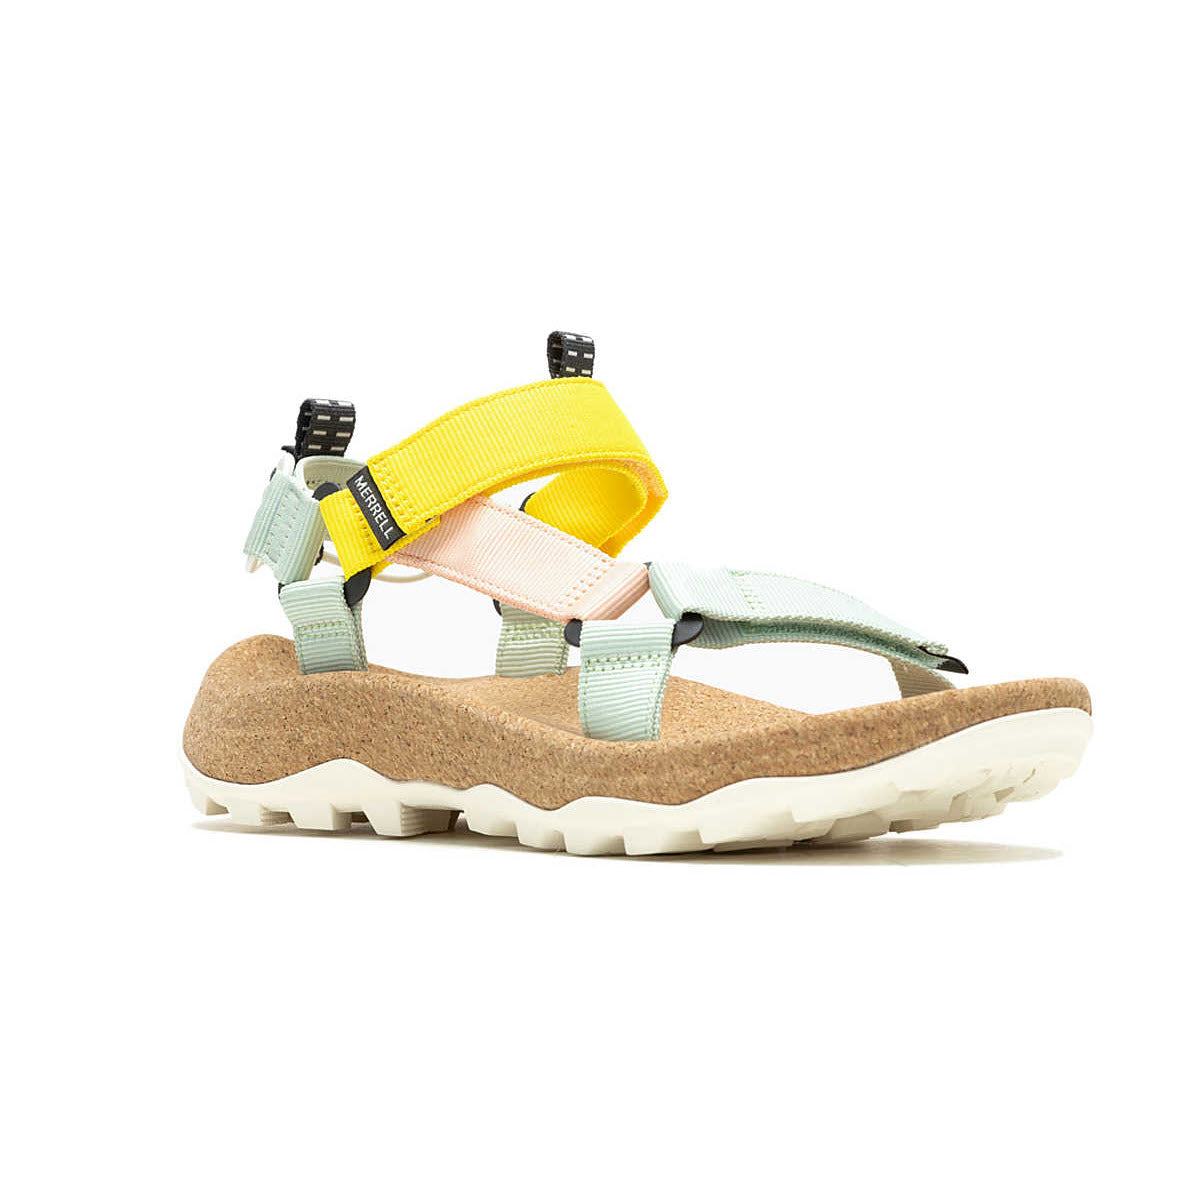 A colorful Merrell sandal featuring a cork footbed and multicolored straps in yellow, white, and mint green with a hook and loop closure, set against a white background.